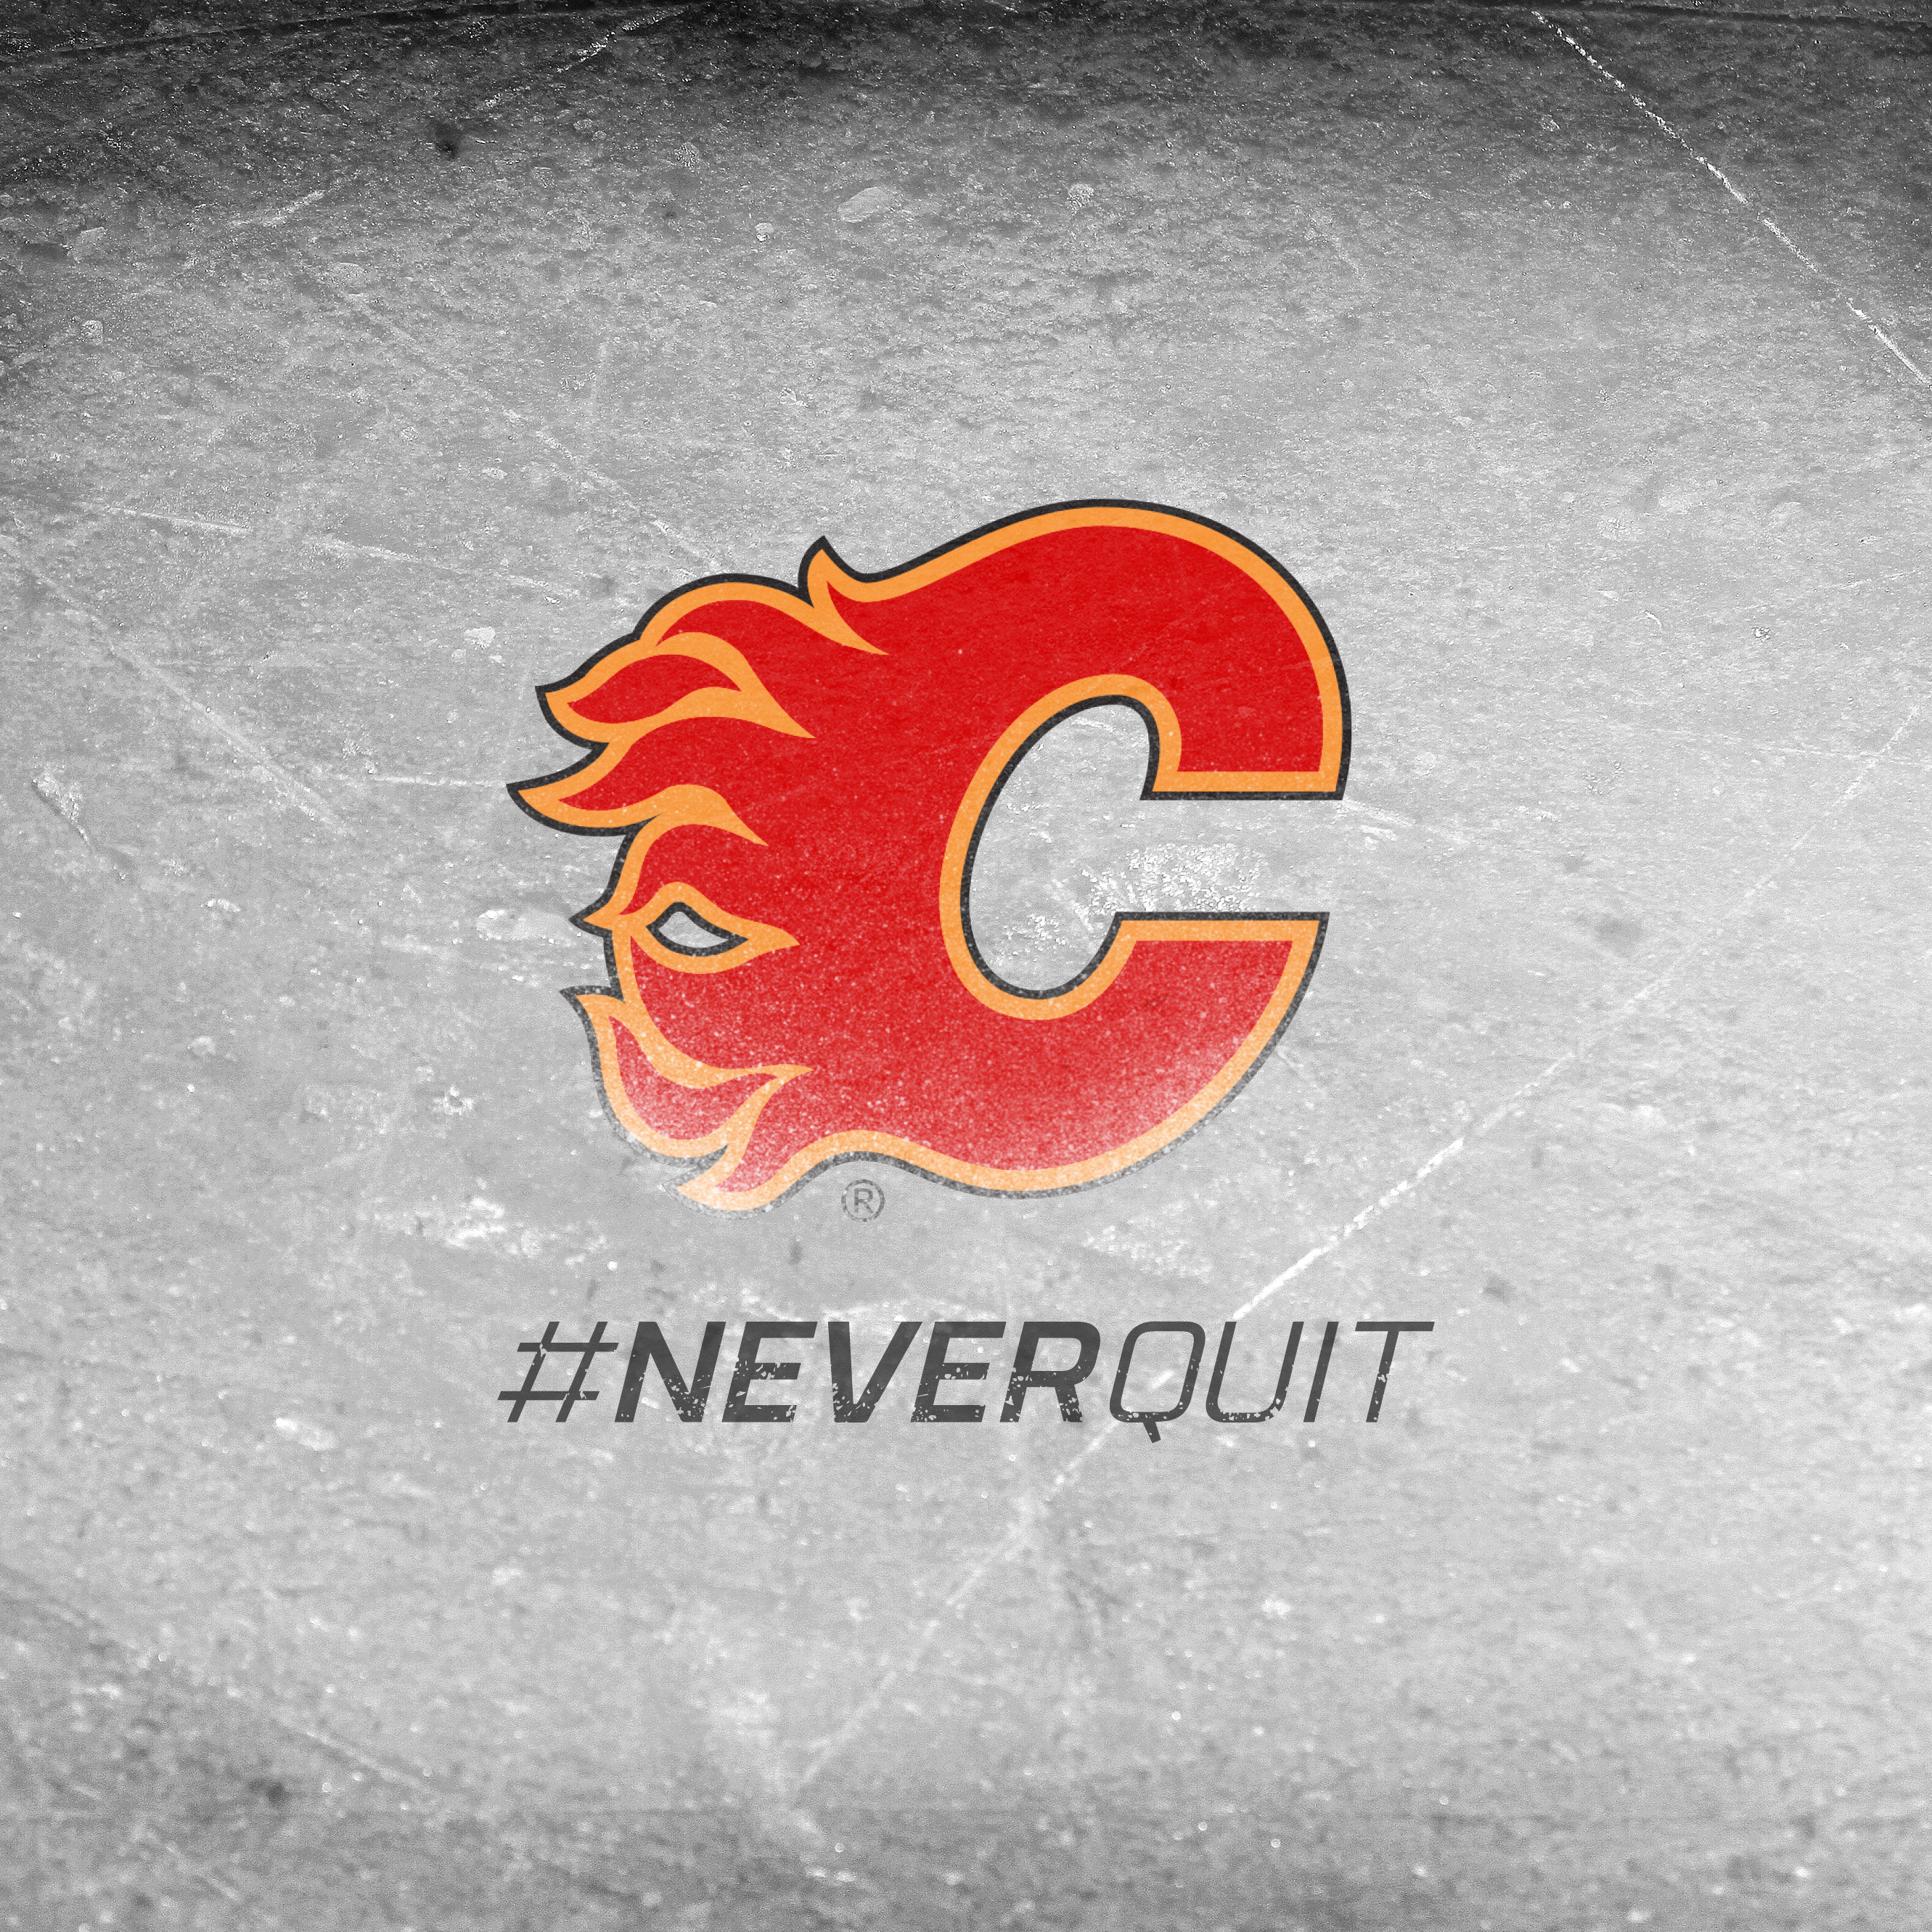 Mobile Calgary Flames Wallpaper | Full HD Pictures